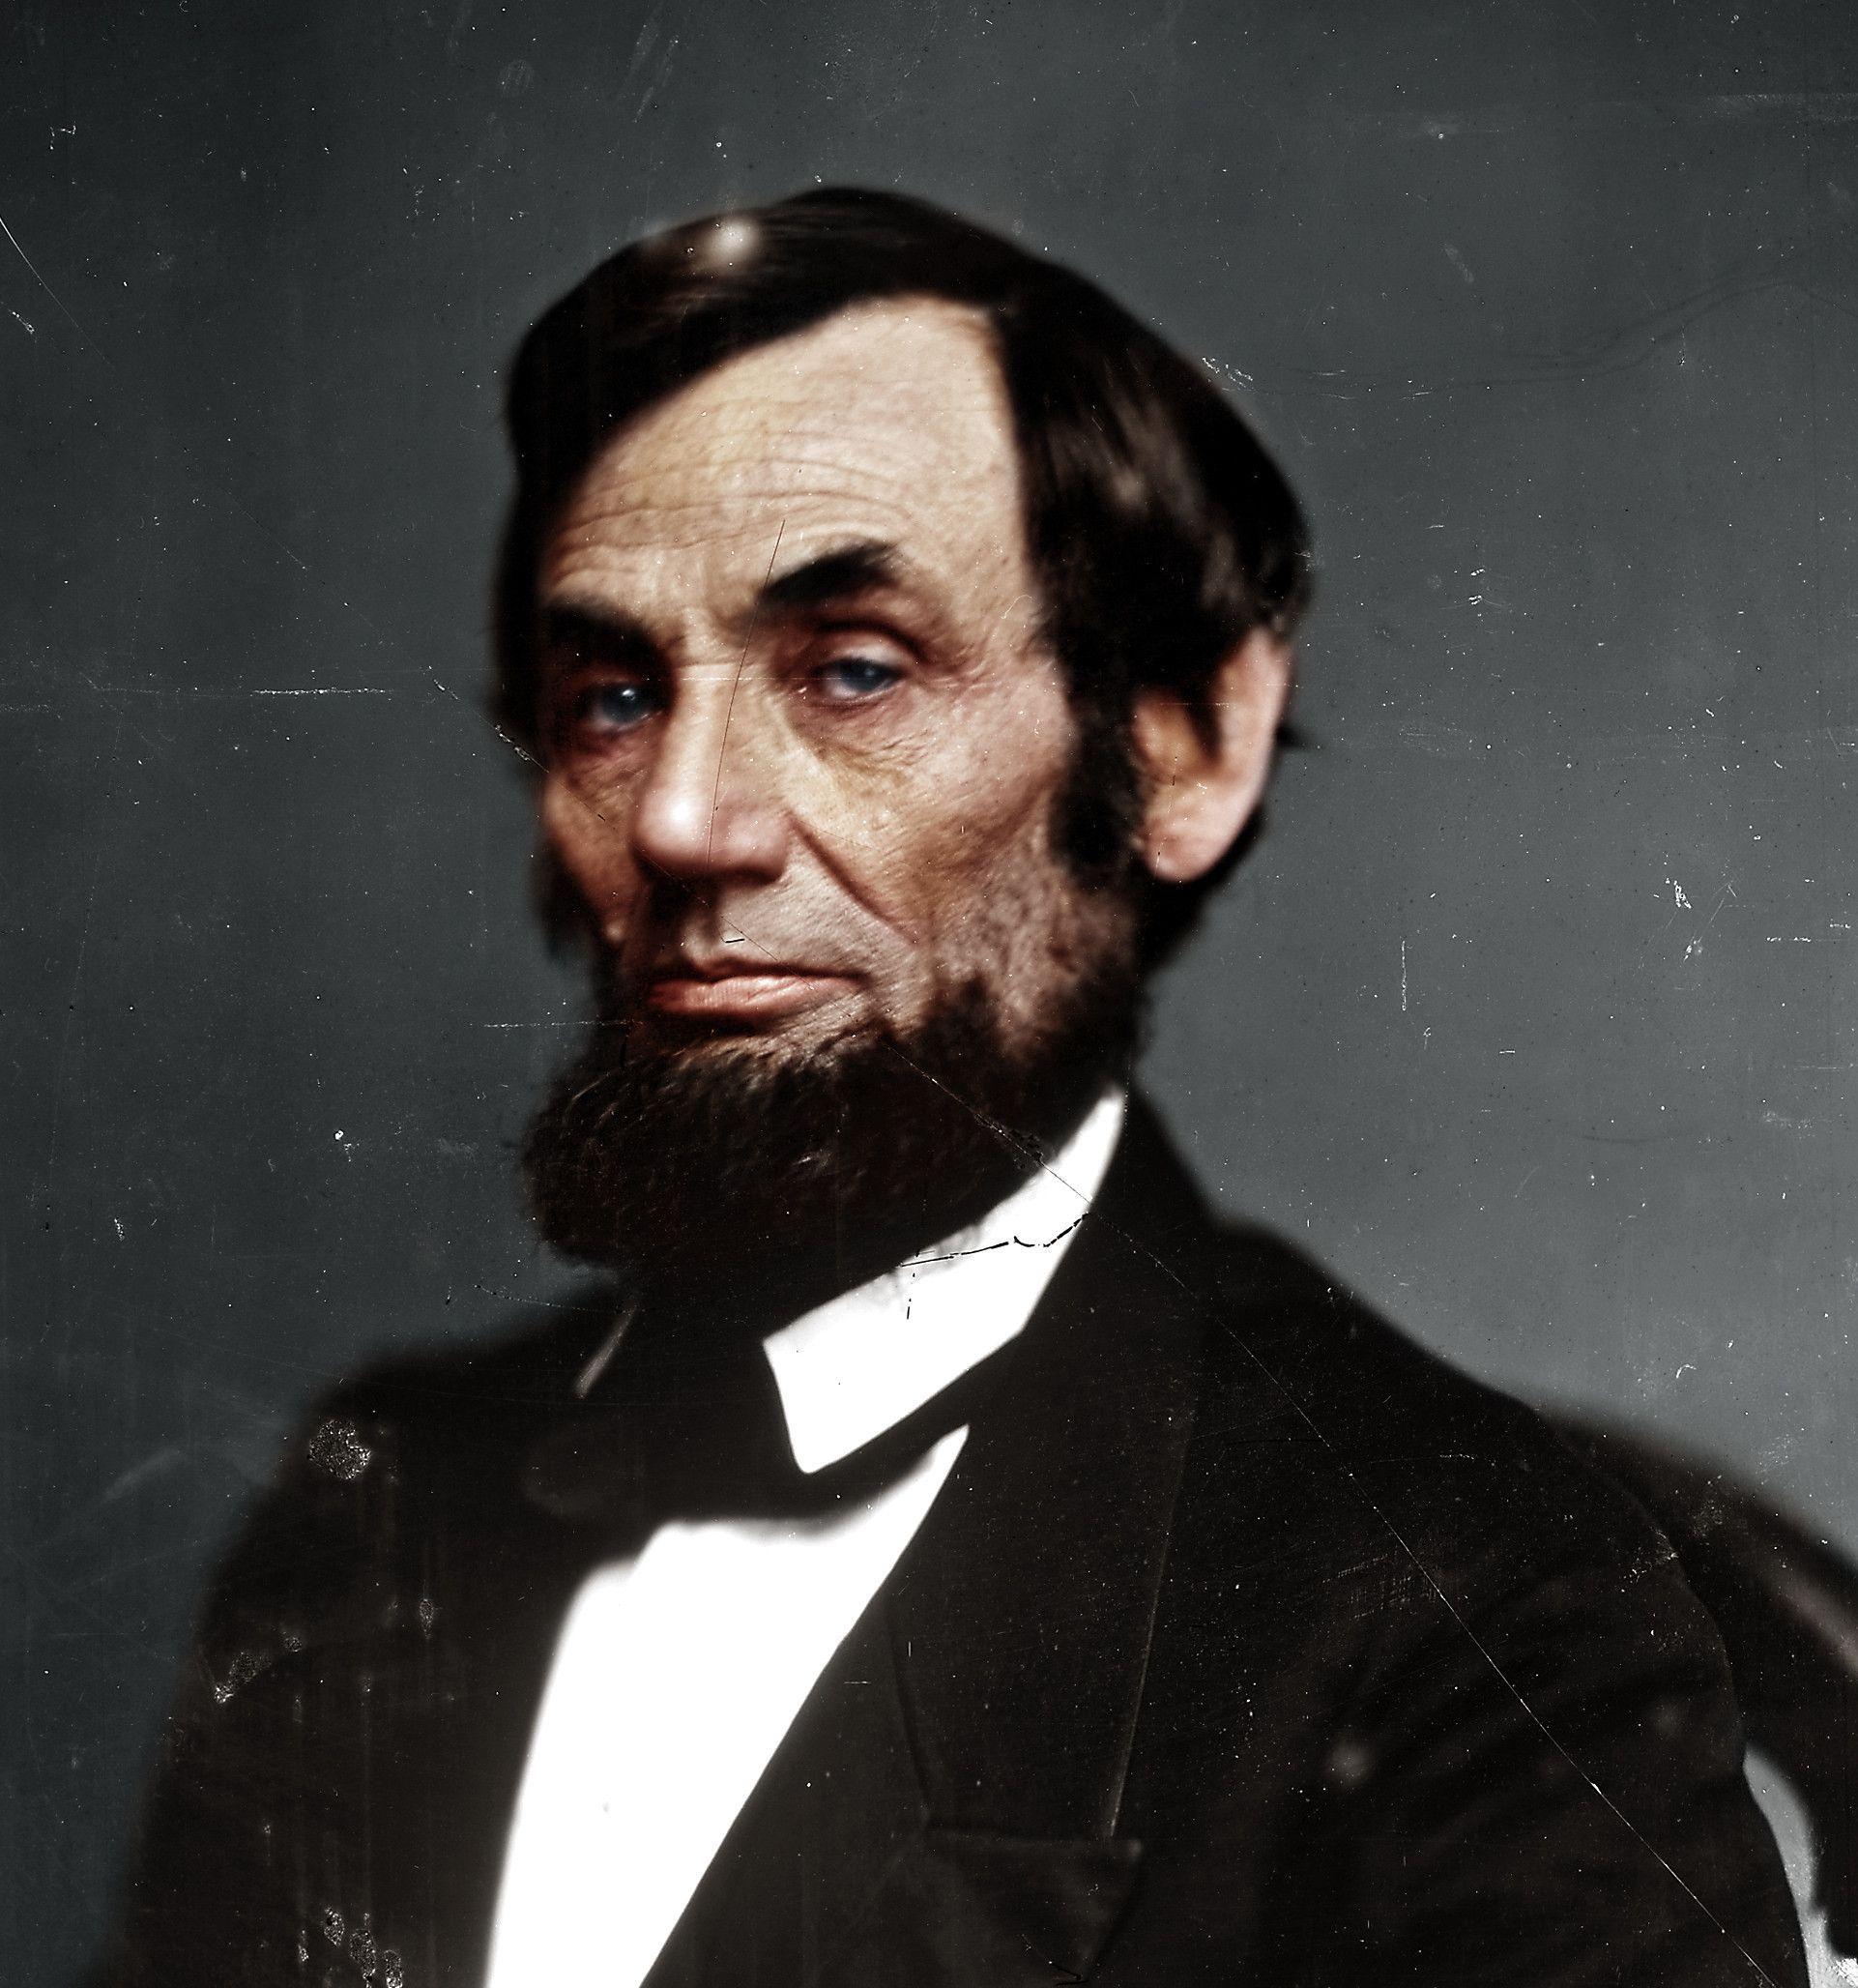 Abraham Lincoln Iphone Wallpapers